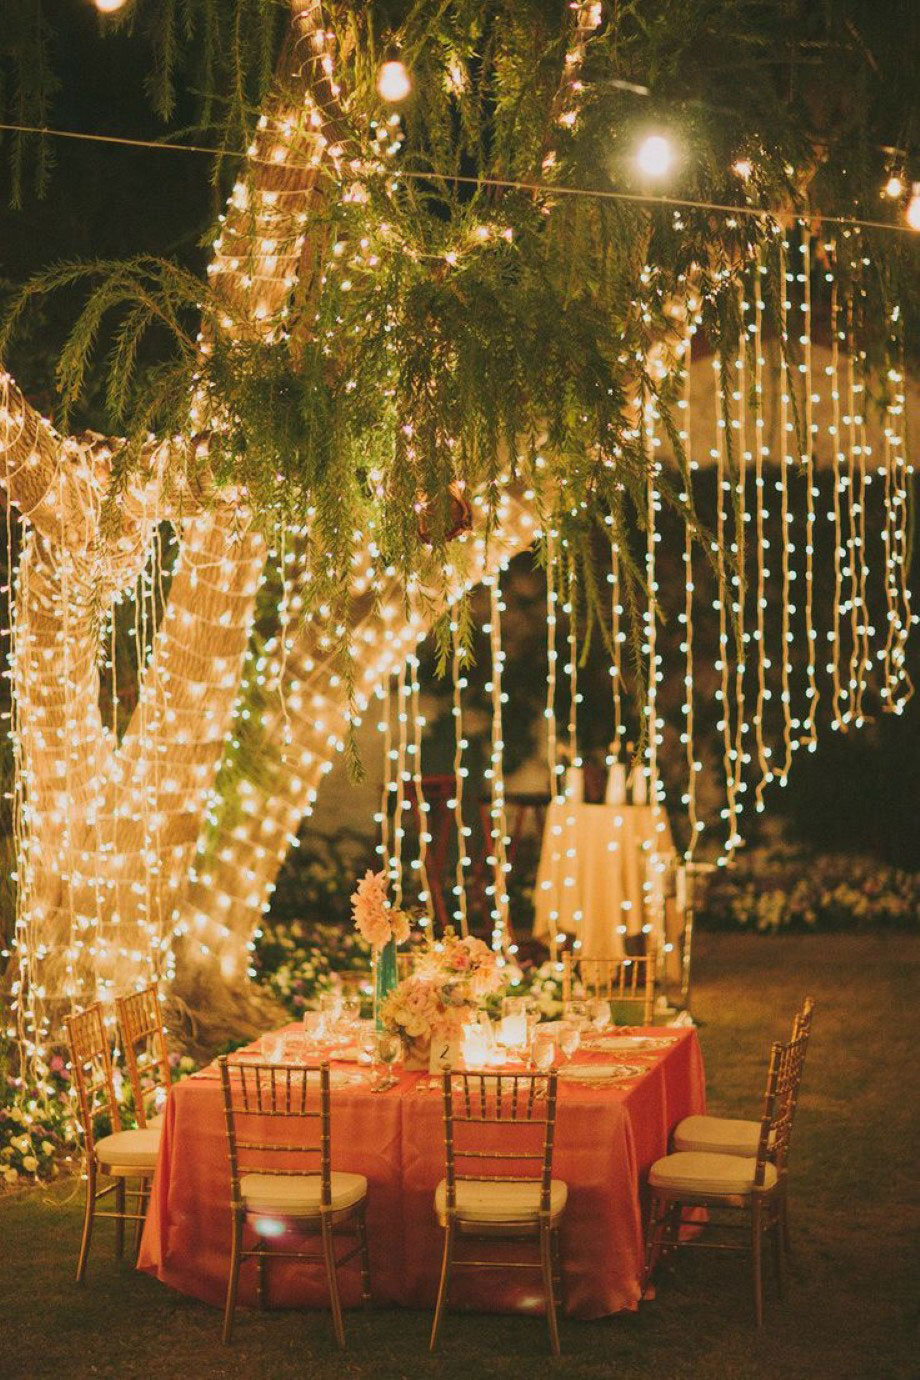 String Lighting Huge Fantastic String Lighting Wrapped On Huge Tree For Patio Idea Feat Romantic Outdoor Dining Table Centerpiece Decoration  Glowing In Glimmery With Patio Lighting Ideas 